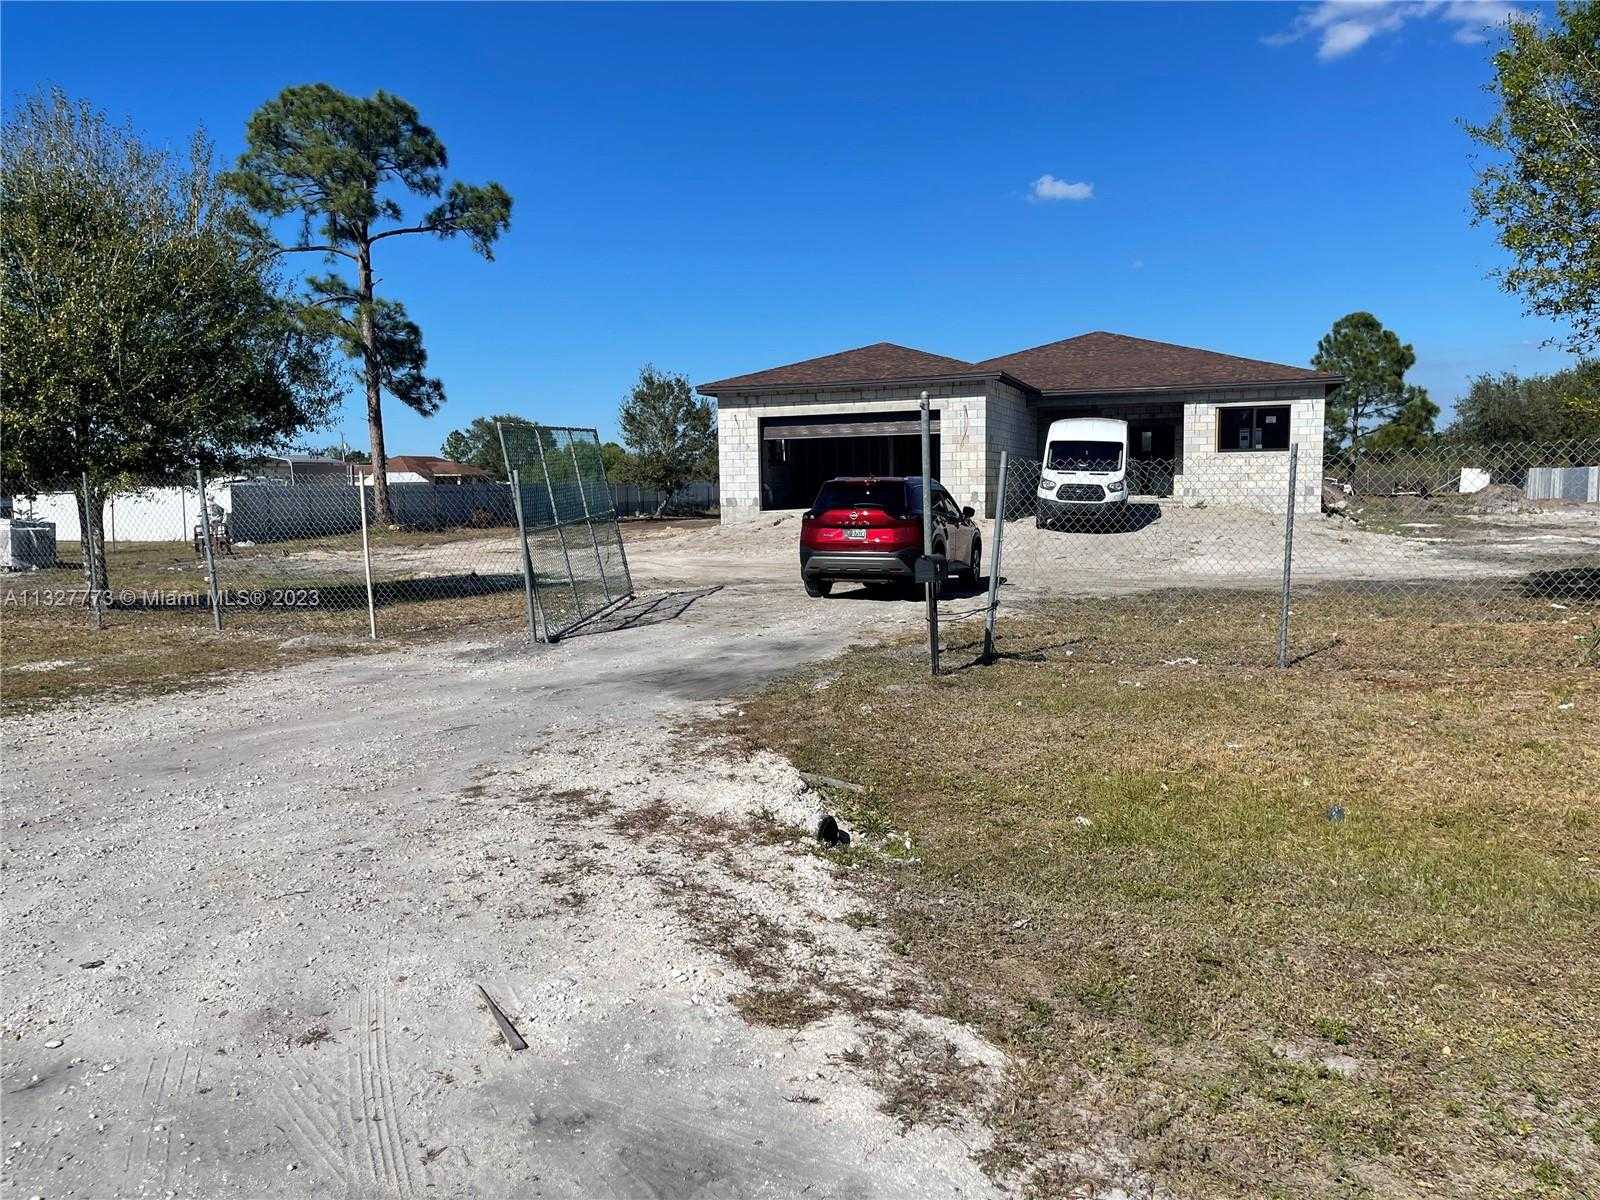 View Clewiston, FL 33440 house